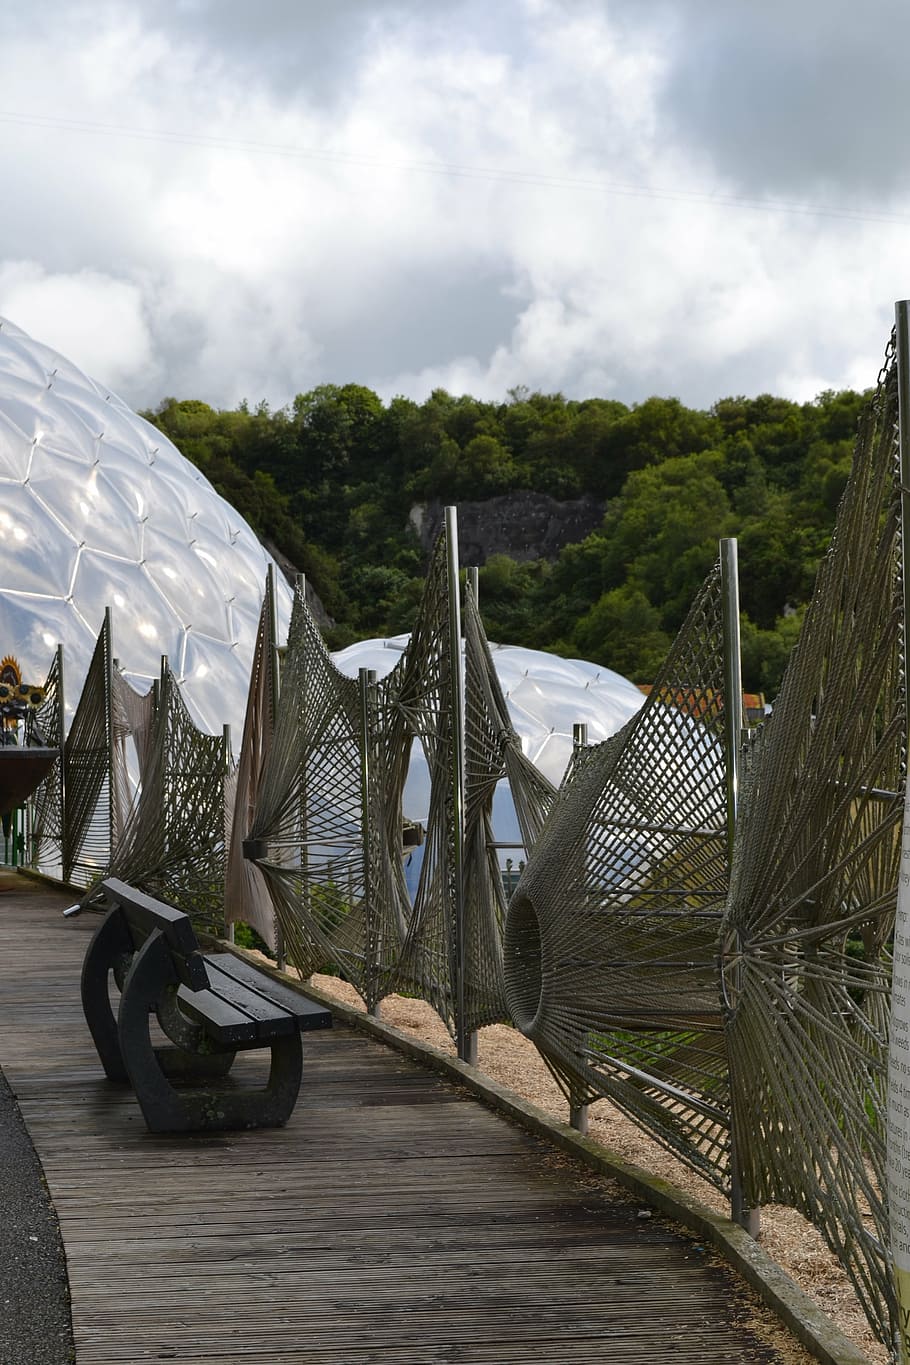 eden, project, biodome, cornwall, environment, ecology, england, conservation, greenhouse, dome